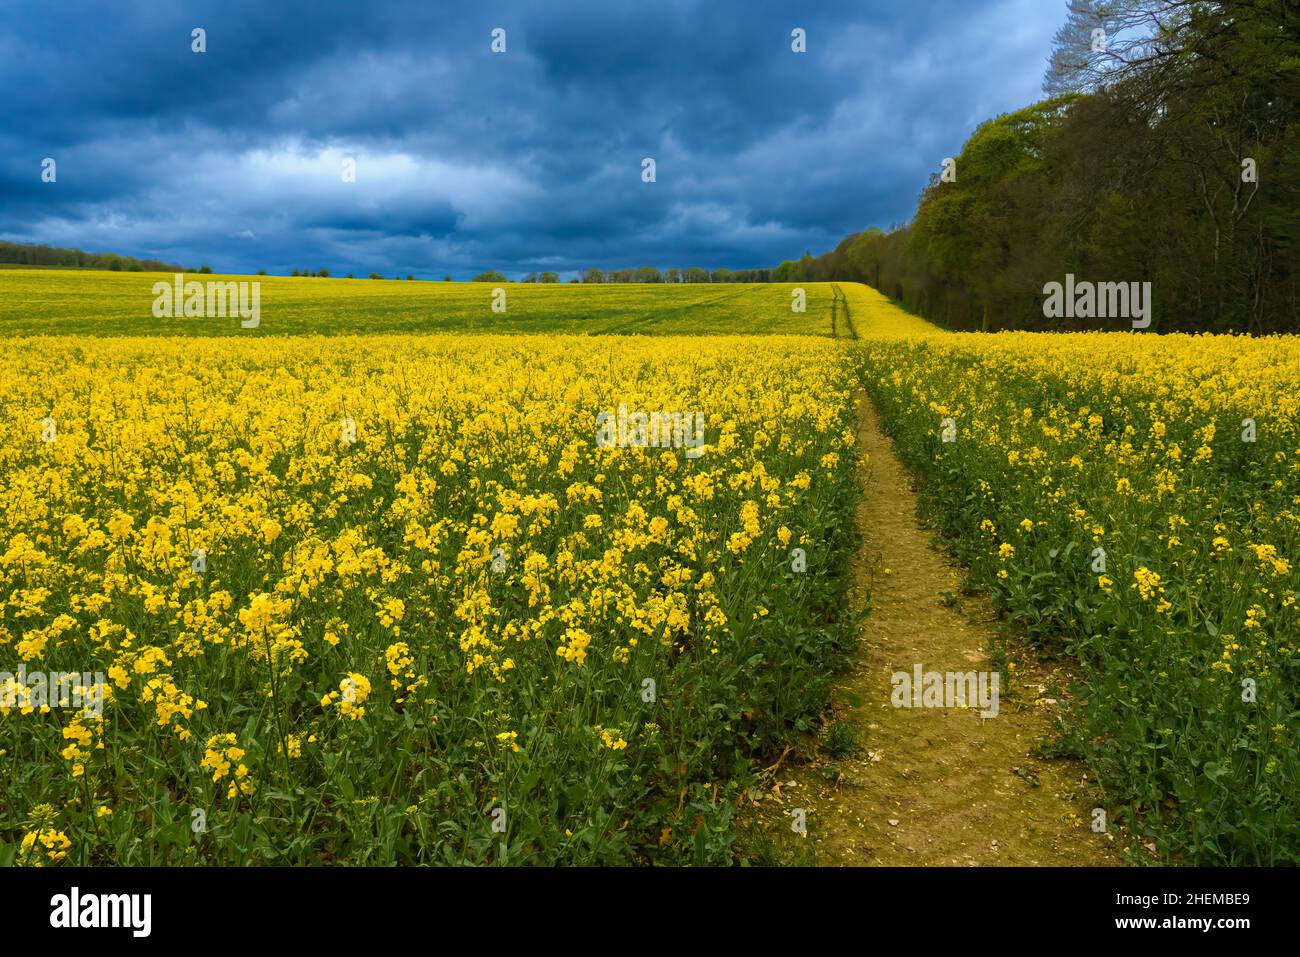 a bright yellow field full of rapeseed (Brassica napus)  flowers under a foreboding dark grey thunder storm cloud sky Stock Photo